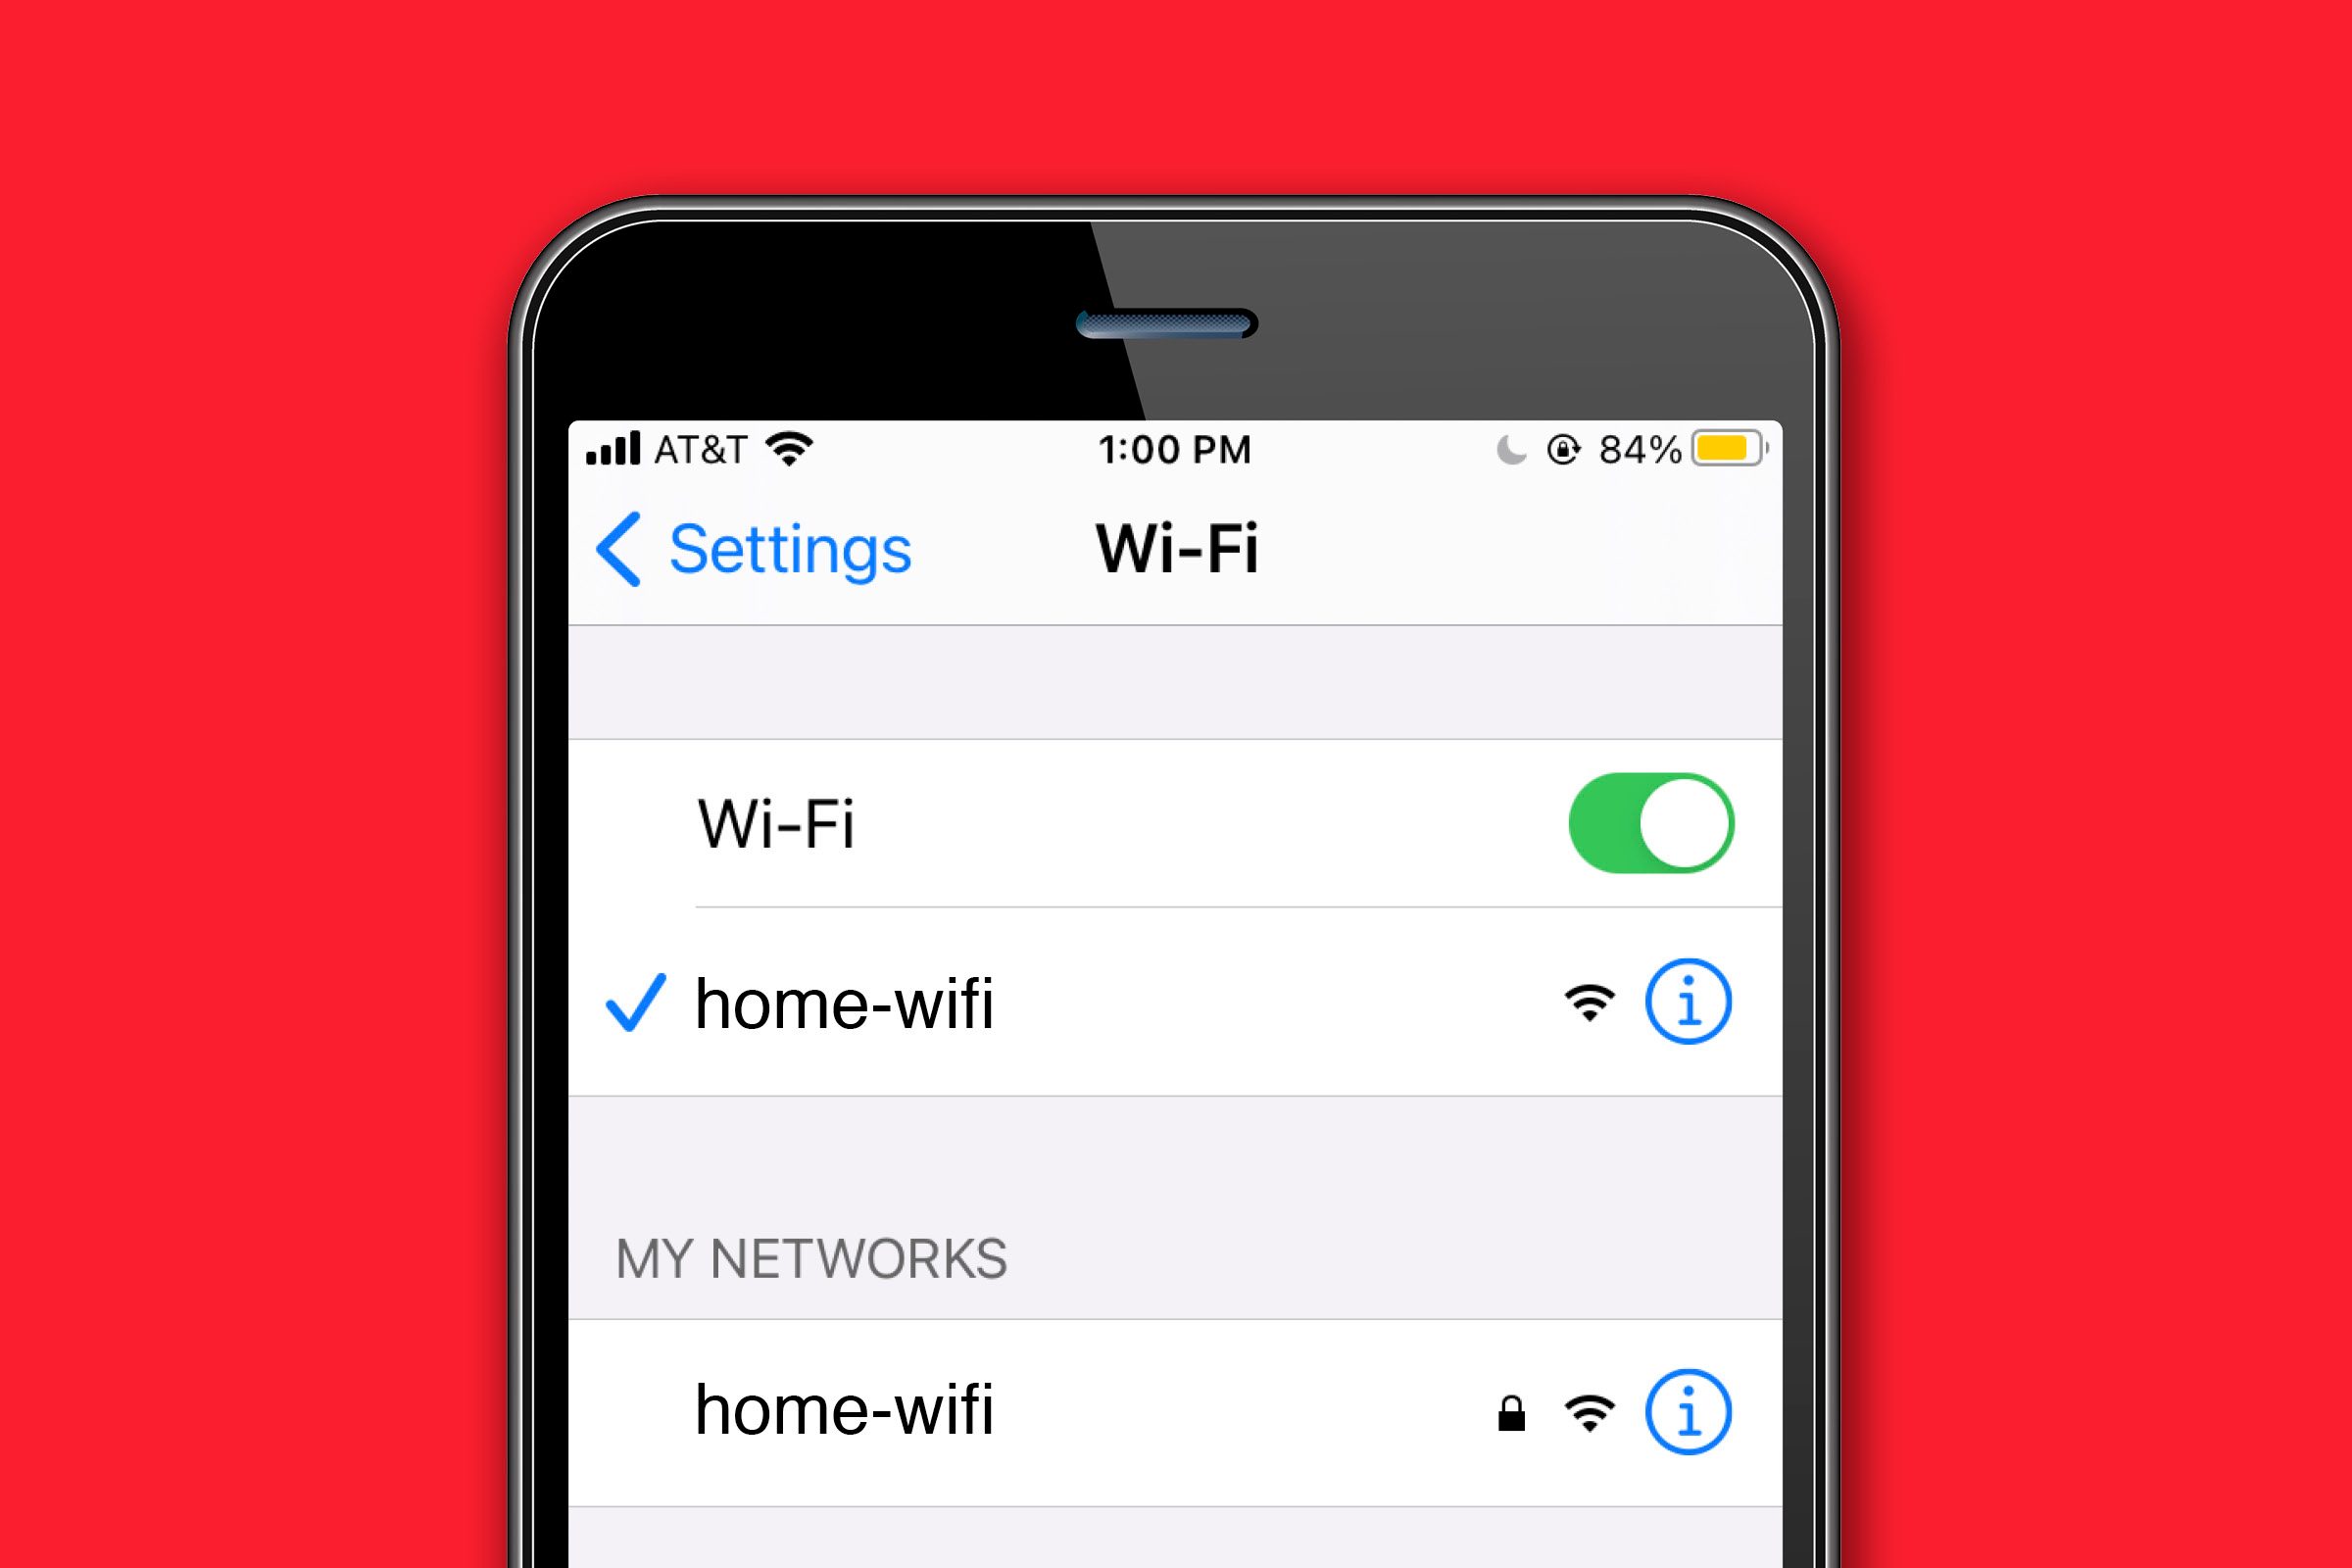 Connect your iPhone to your home wireless network